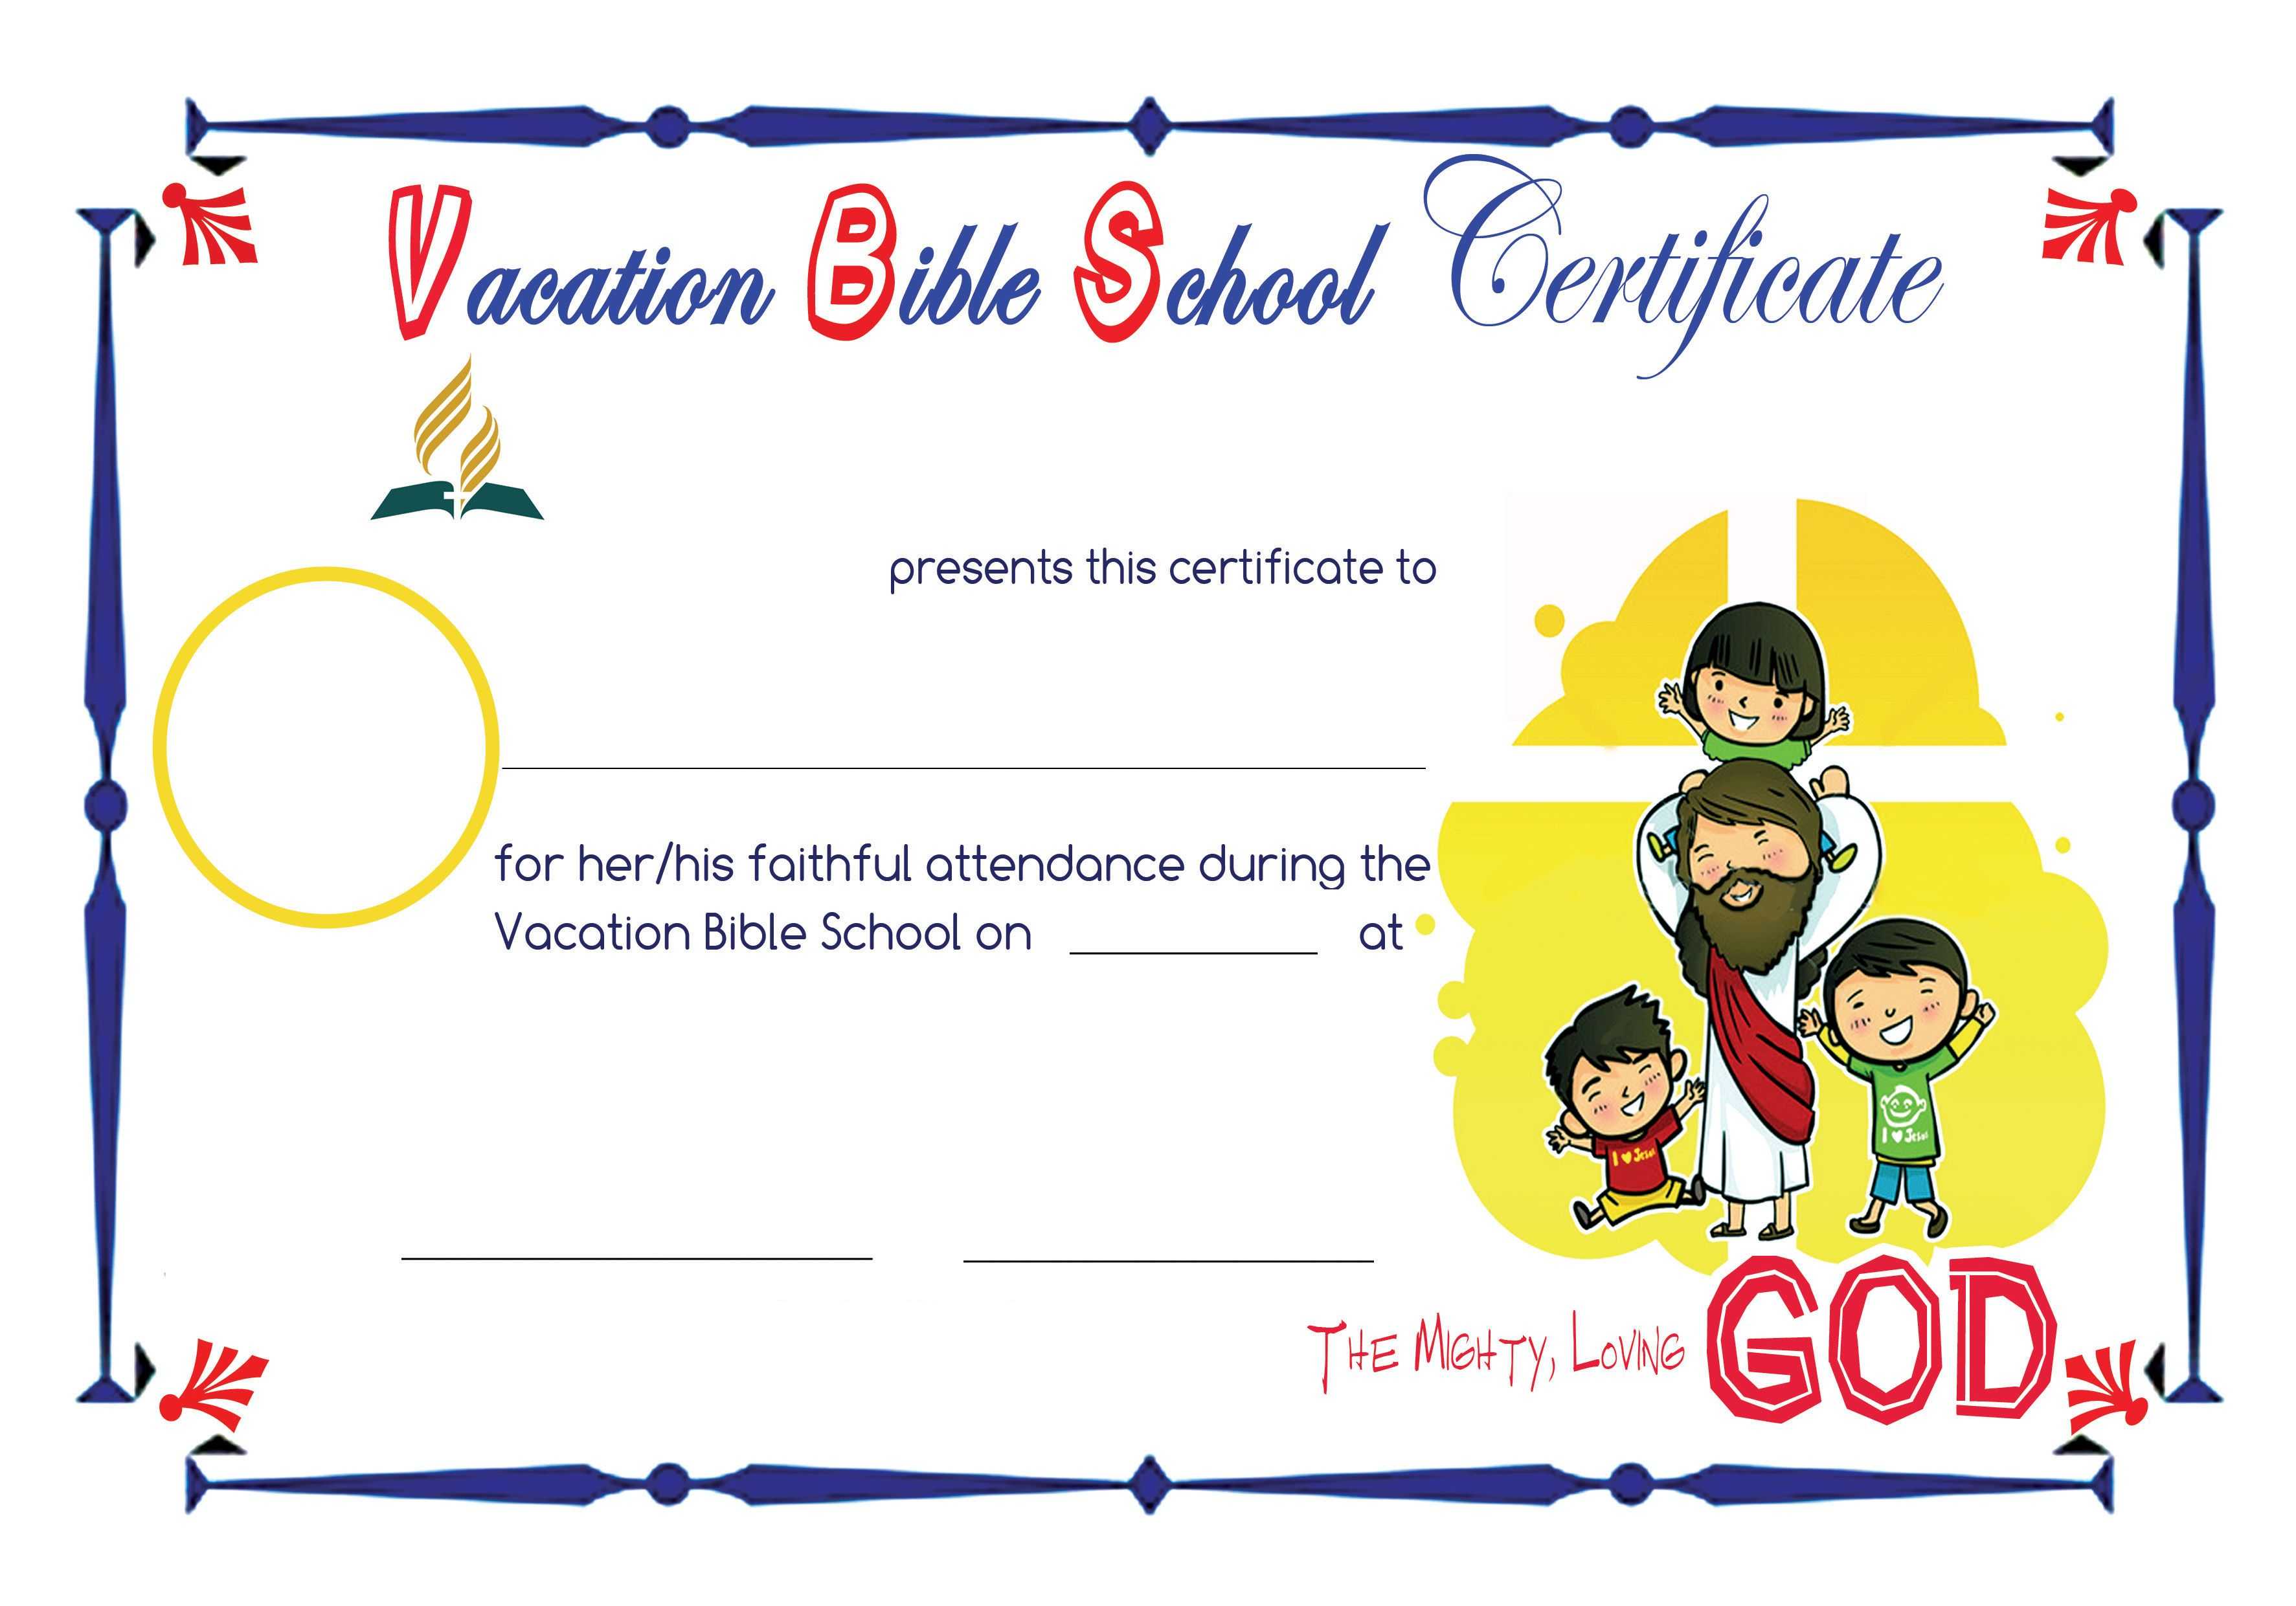 Bible School Certificates Pictures To Pin On Pinterest In School Certificate Templates Free